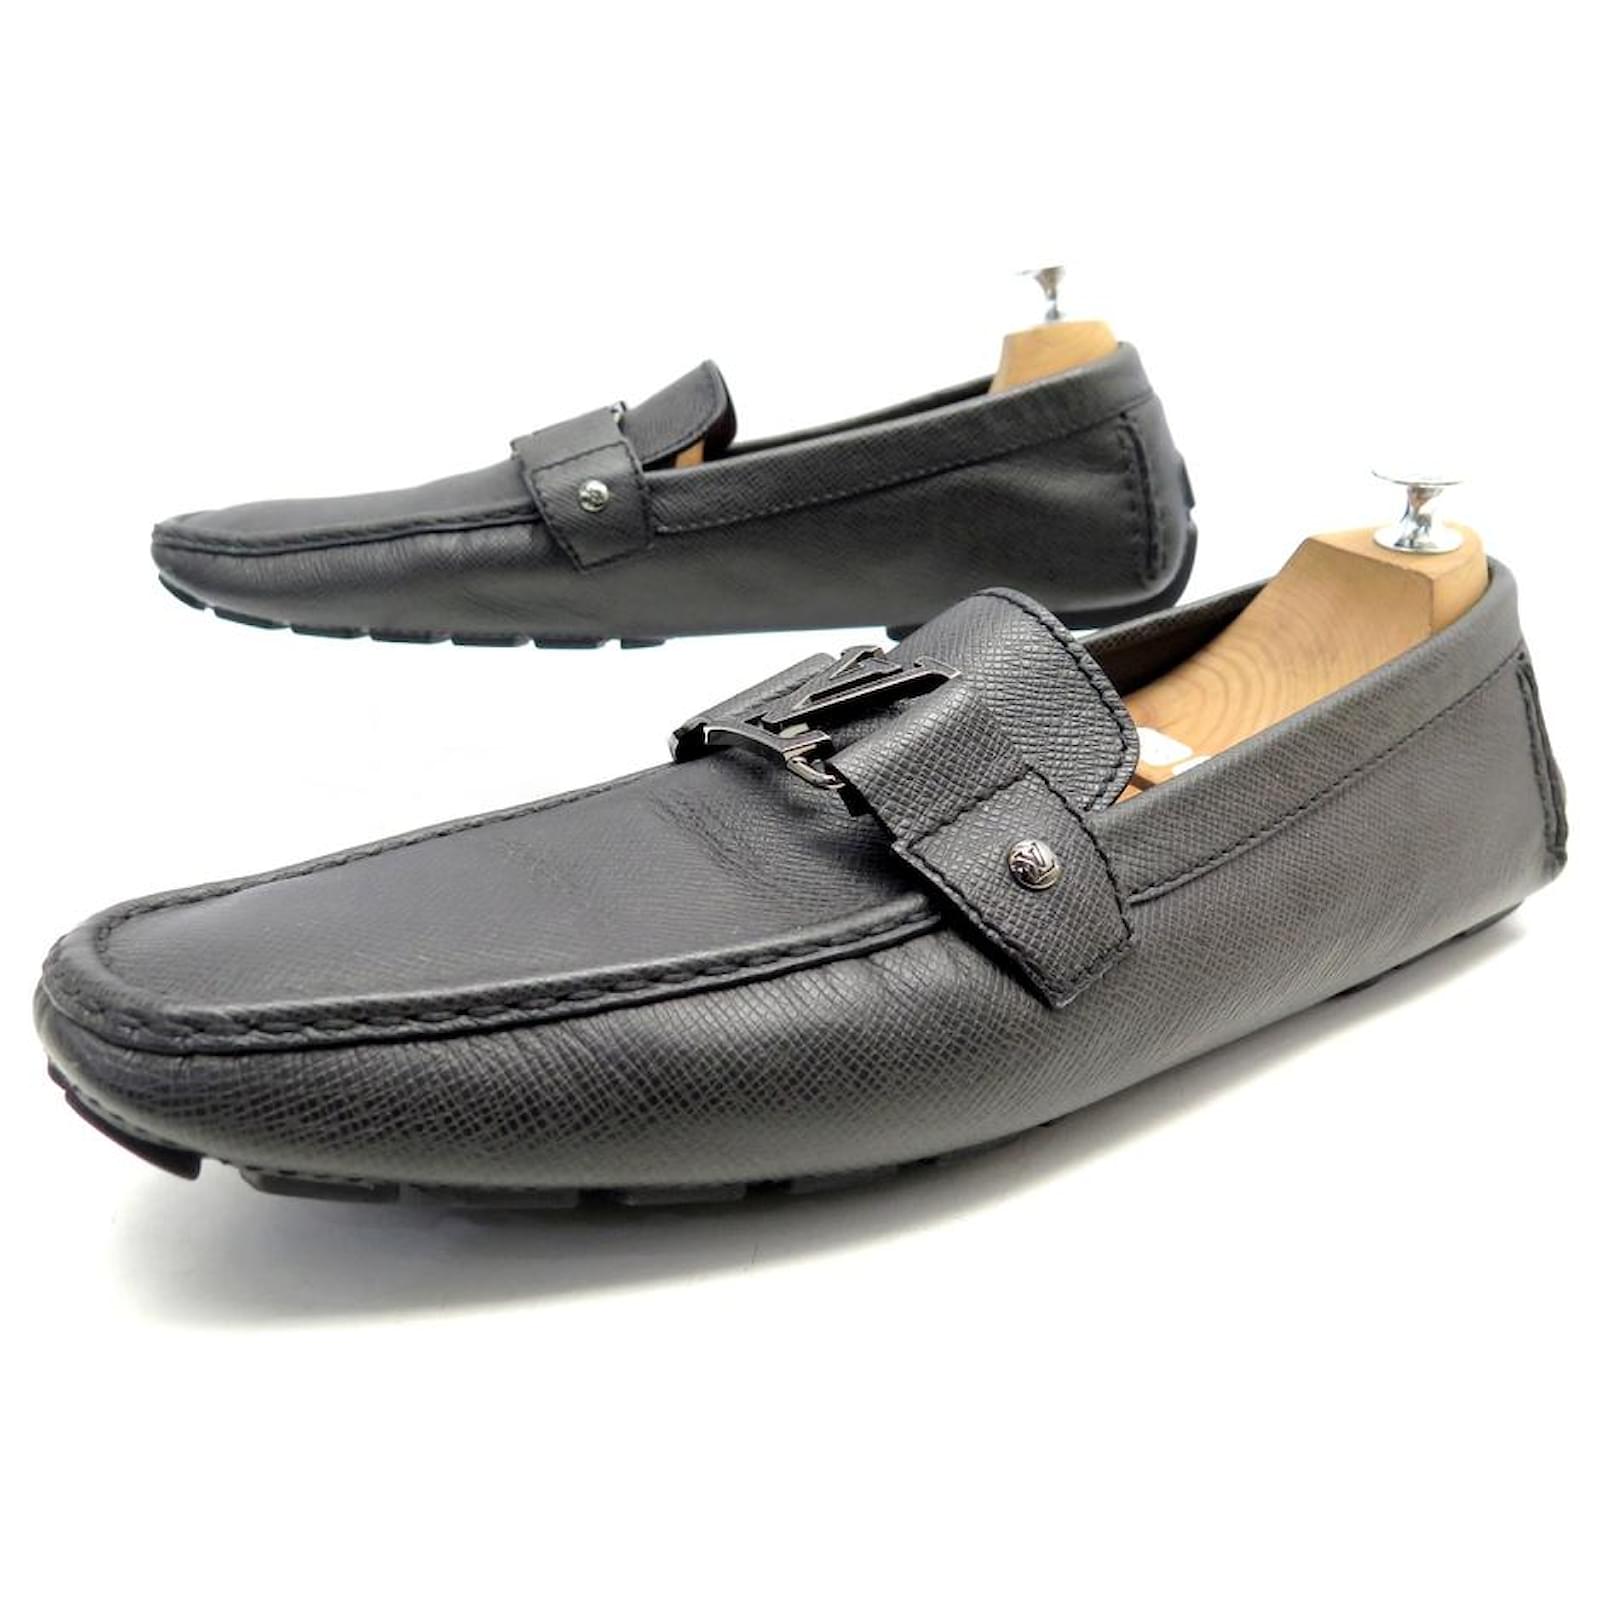 Louis Vuitton Brown Leather Monte Carlo Loafers